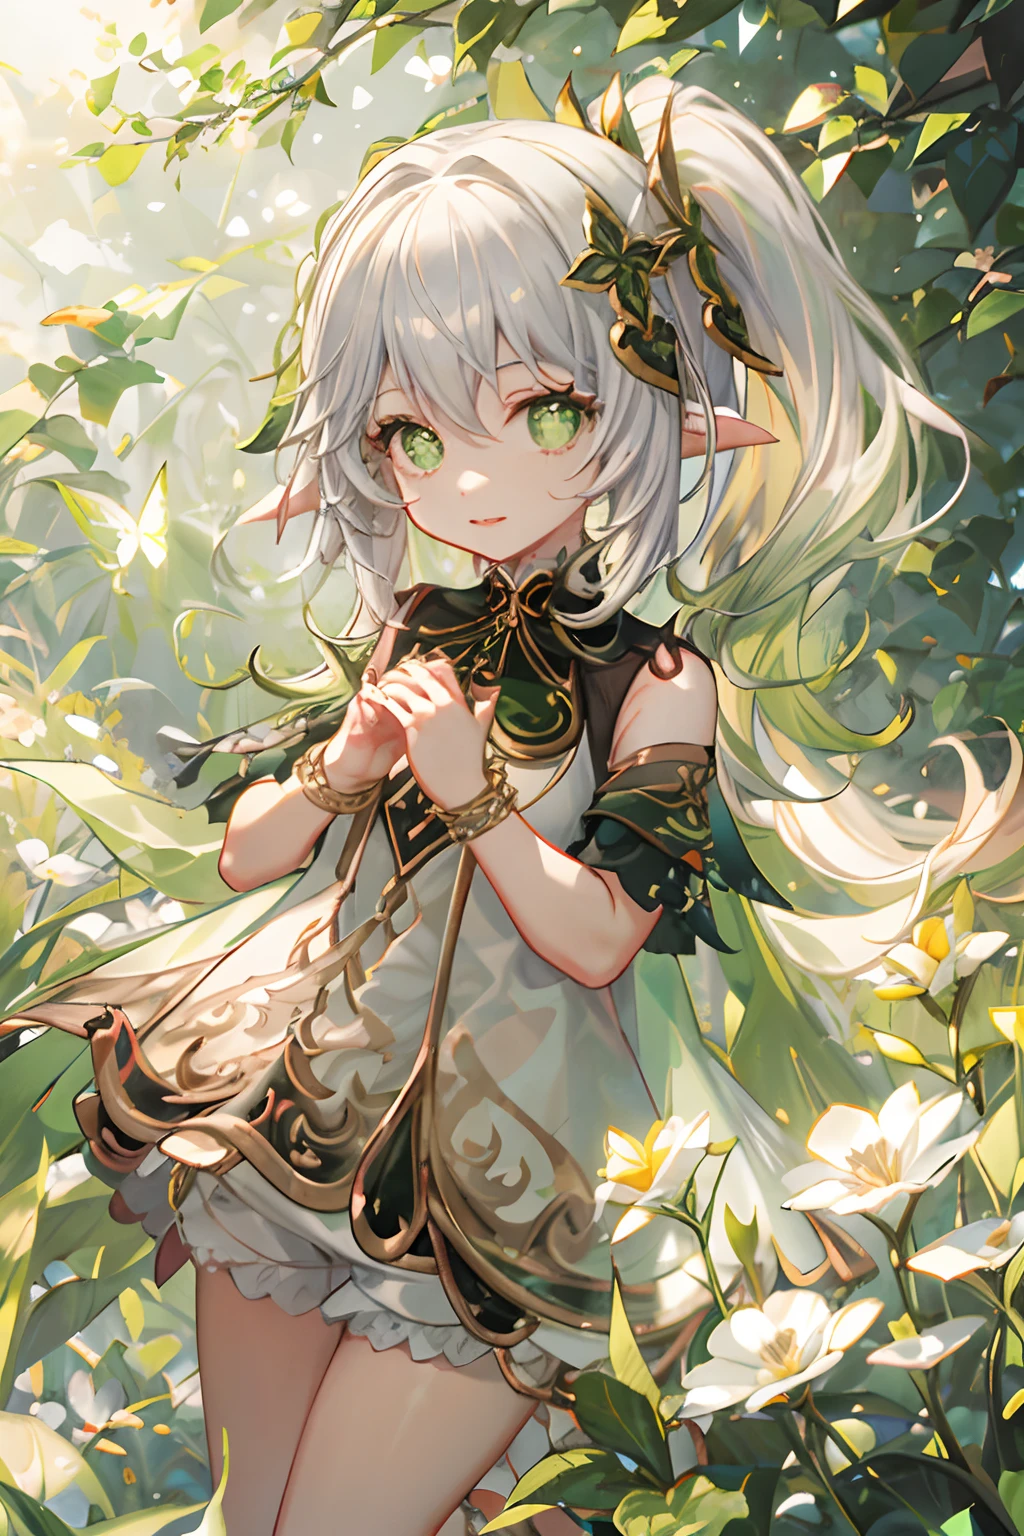 ,butterfly style,Nahida \(Genshin Impact\), cross-shaped pupils, White hair, pony tails, white dresses，Green and gold embroidery, elven ears, kiddy big breasts, playing in a field of flowers, nice hands perfect hands, jumping in the air, in a sunny forest full of flowers and mushrooms